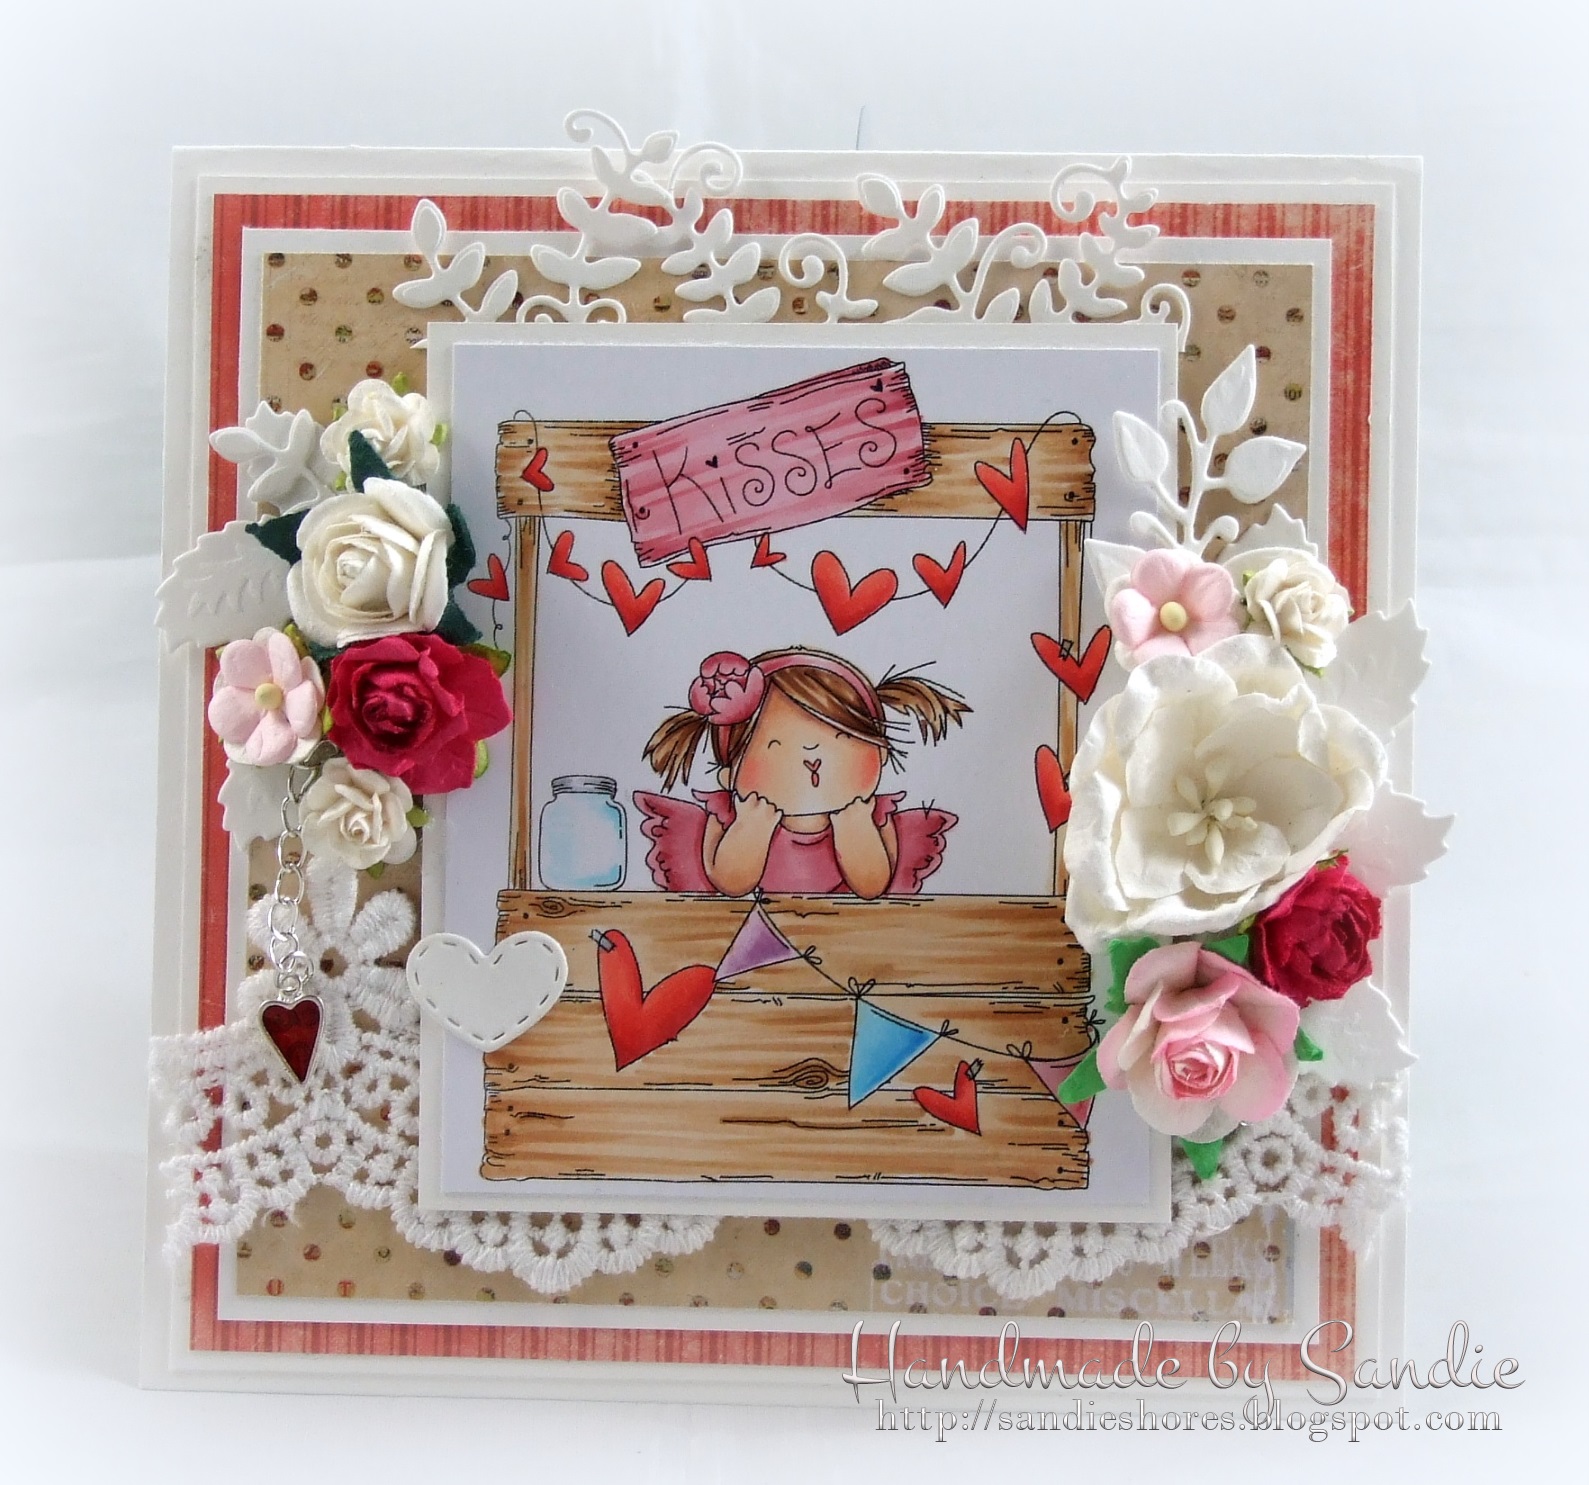 Stamping Bella JANUARY 2017 rubber stamp release- Kissing Booth SQUIDGIES card by Sandie Dunne